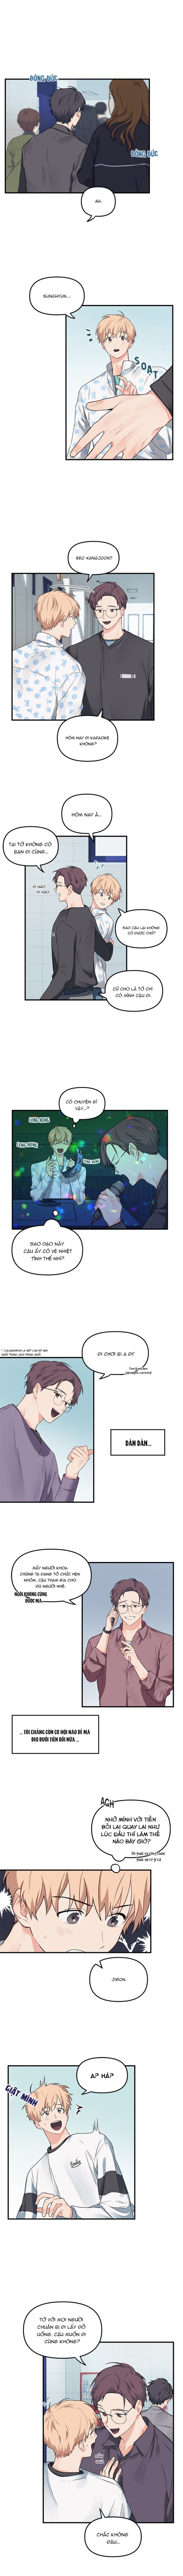 blood-and-love-chap-4-1